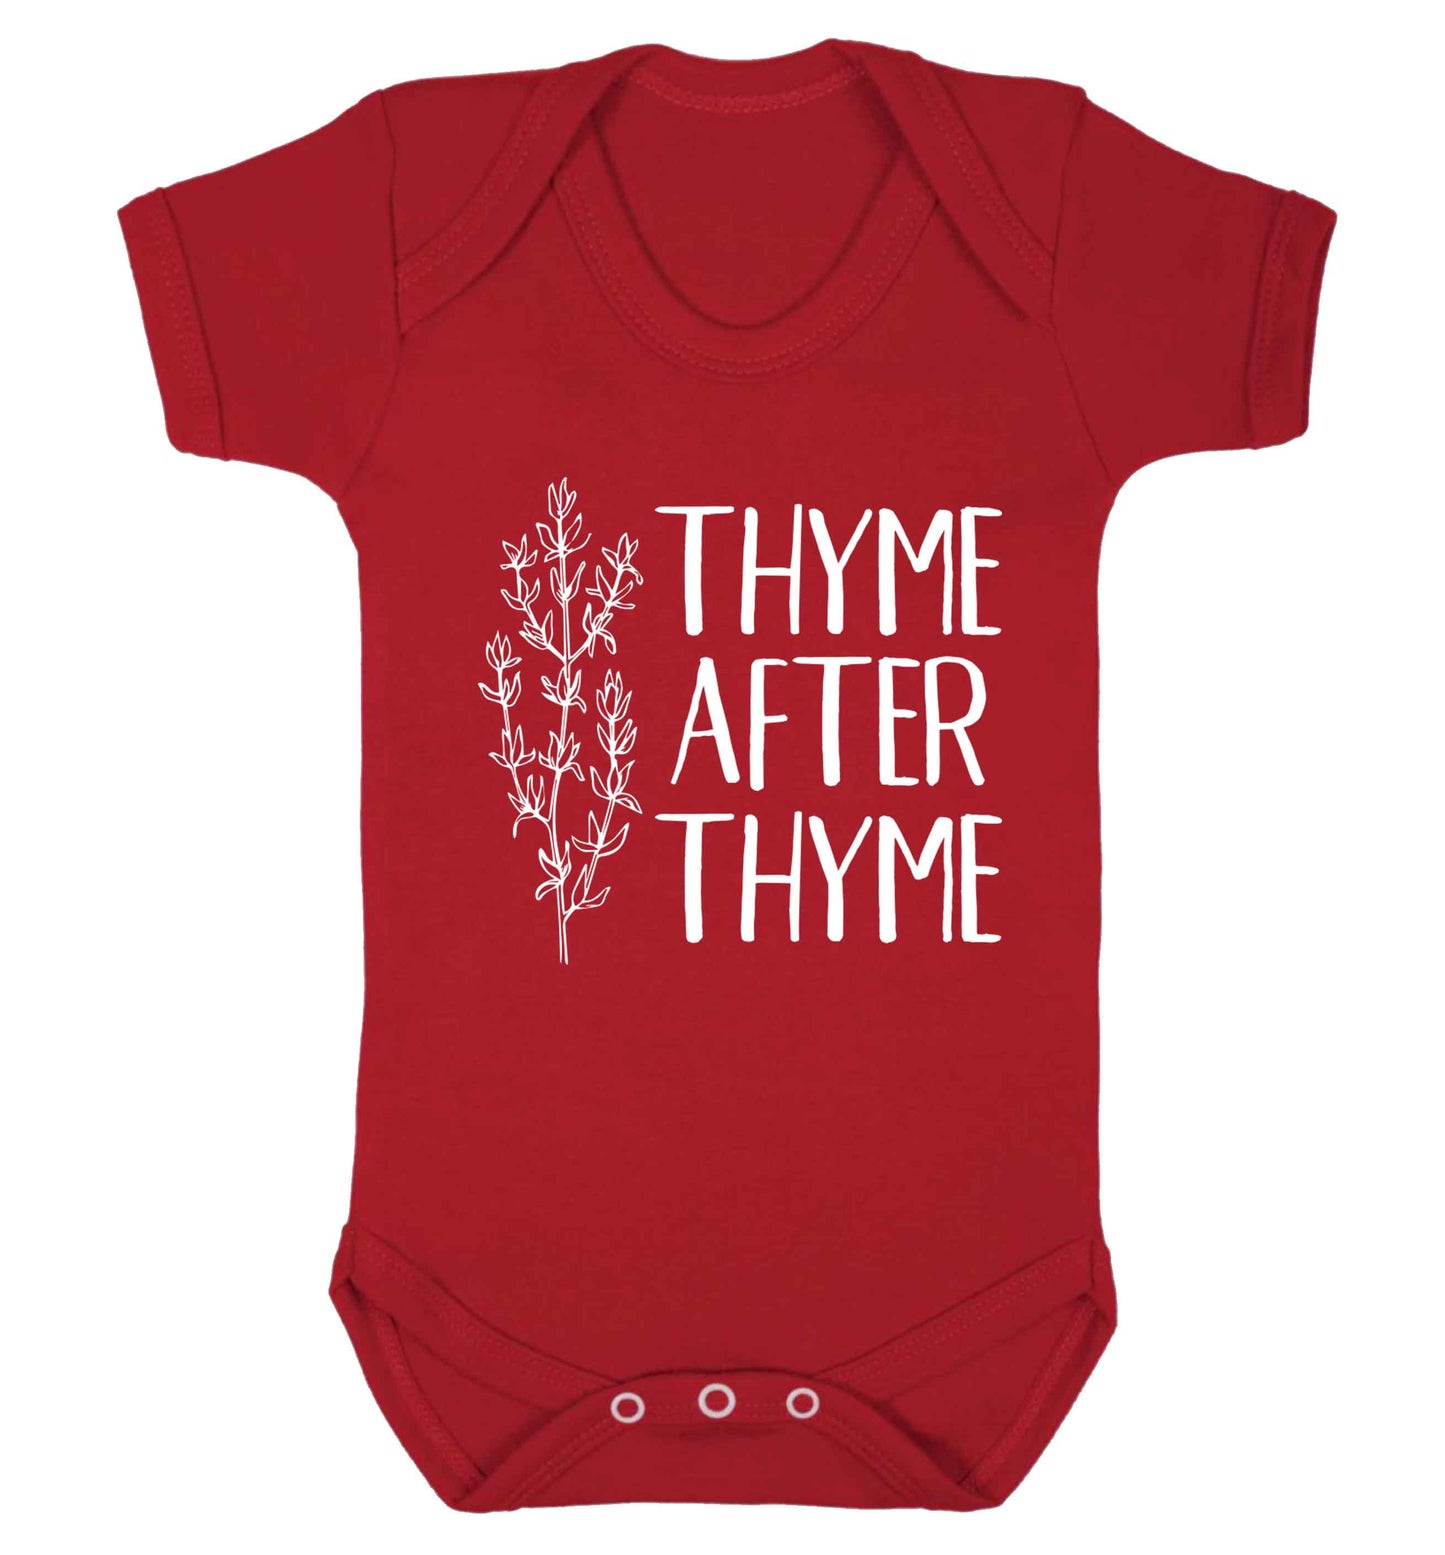 Thyme after thyme Baby Vest red 18-24 months